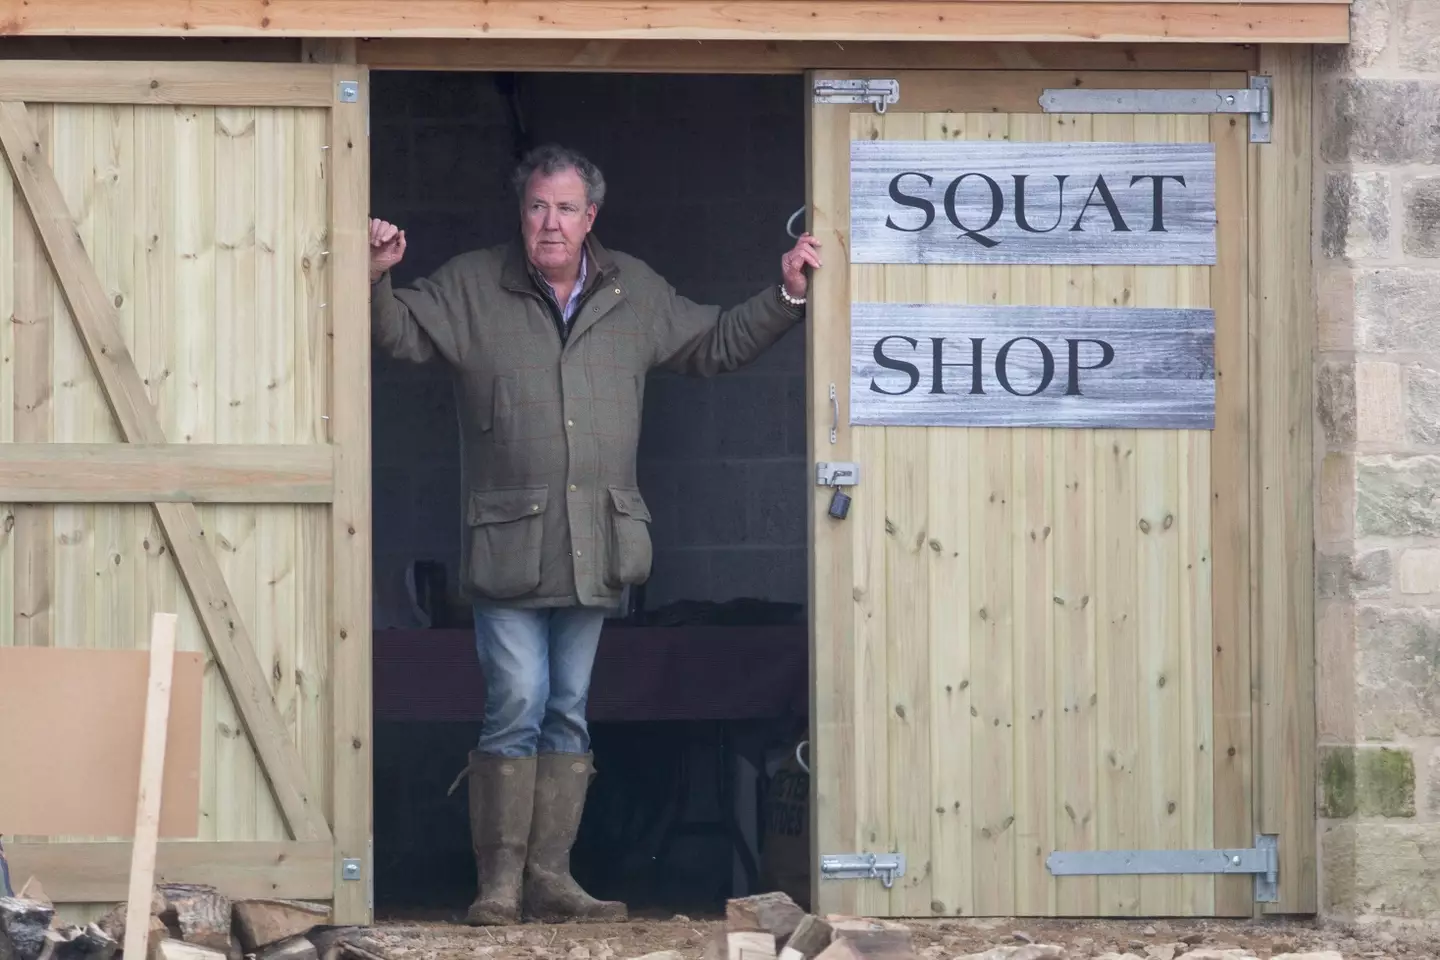 Neighbours of Clarkson have urged the council to let him build a car park at Diddly Squat Farm.